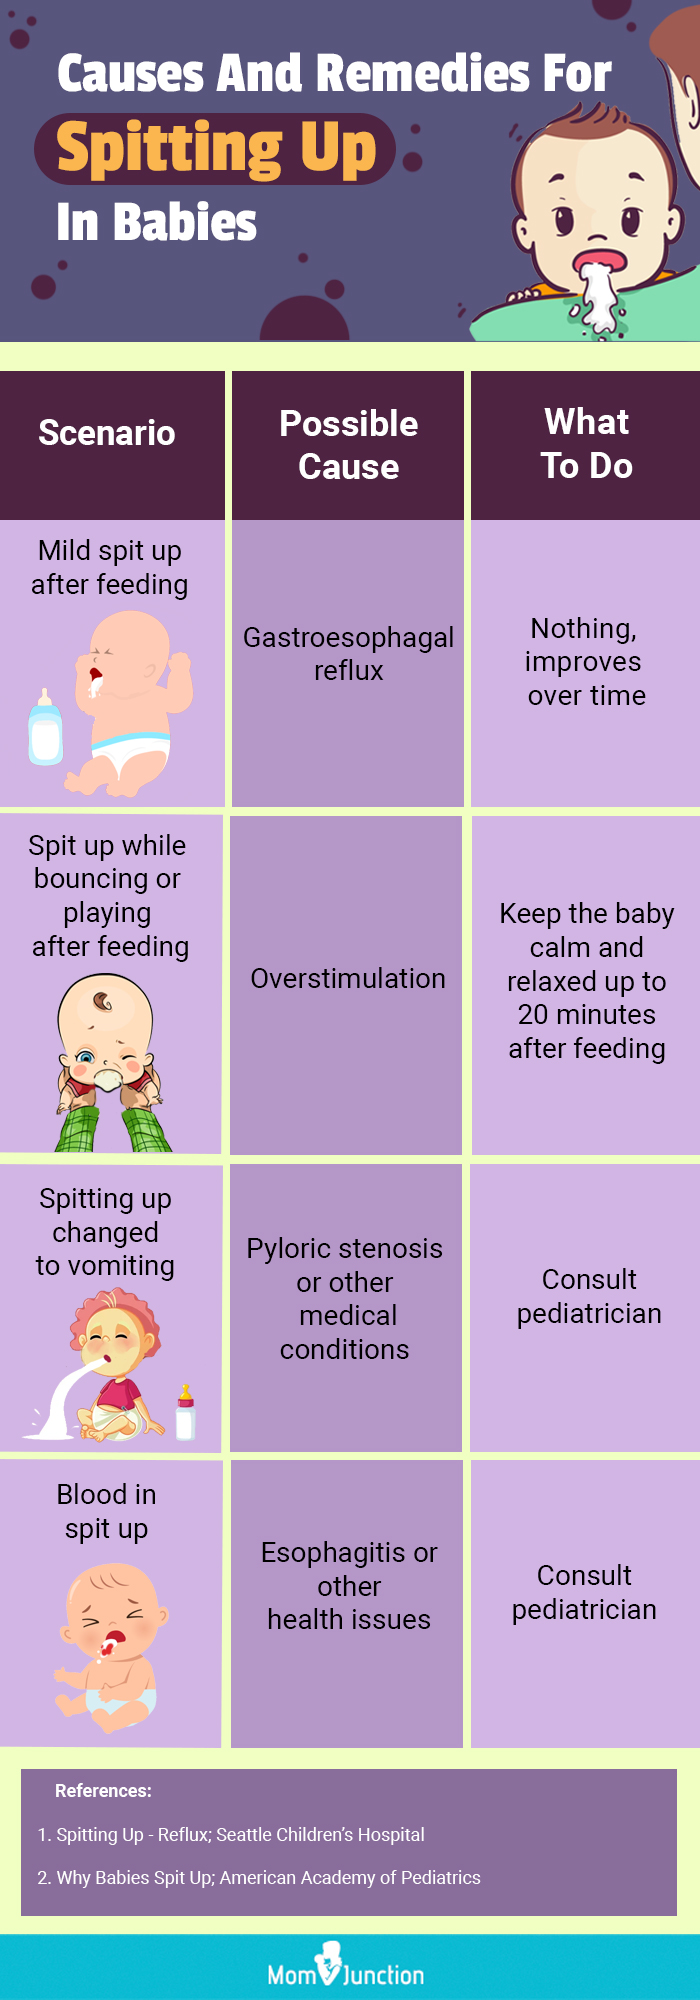 causes and remedies for spitting up in babies (infographic)